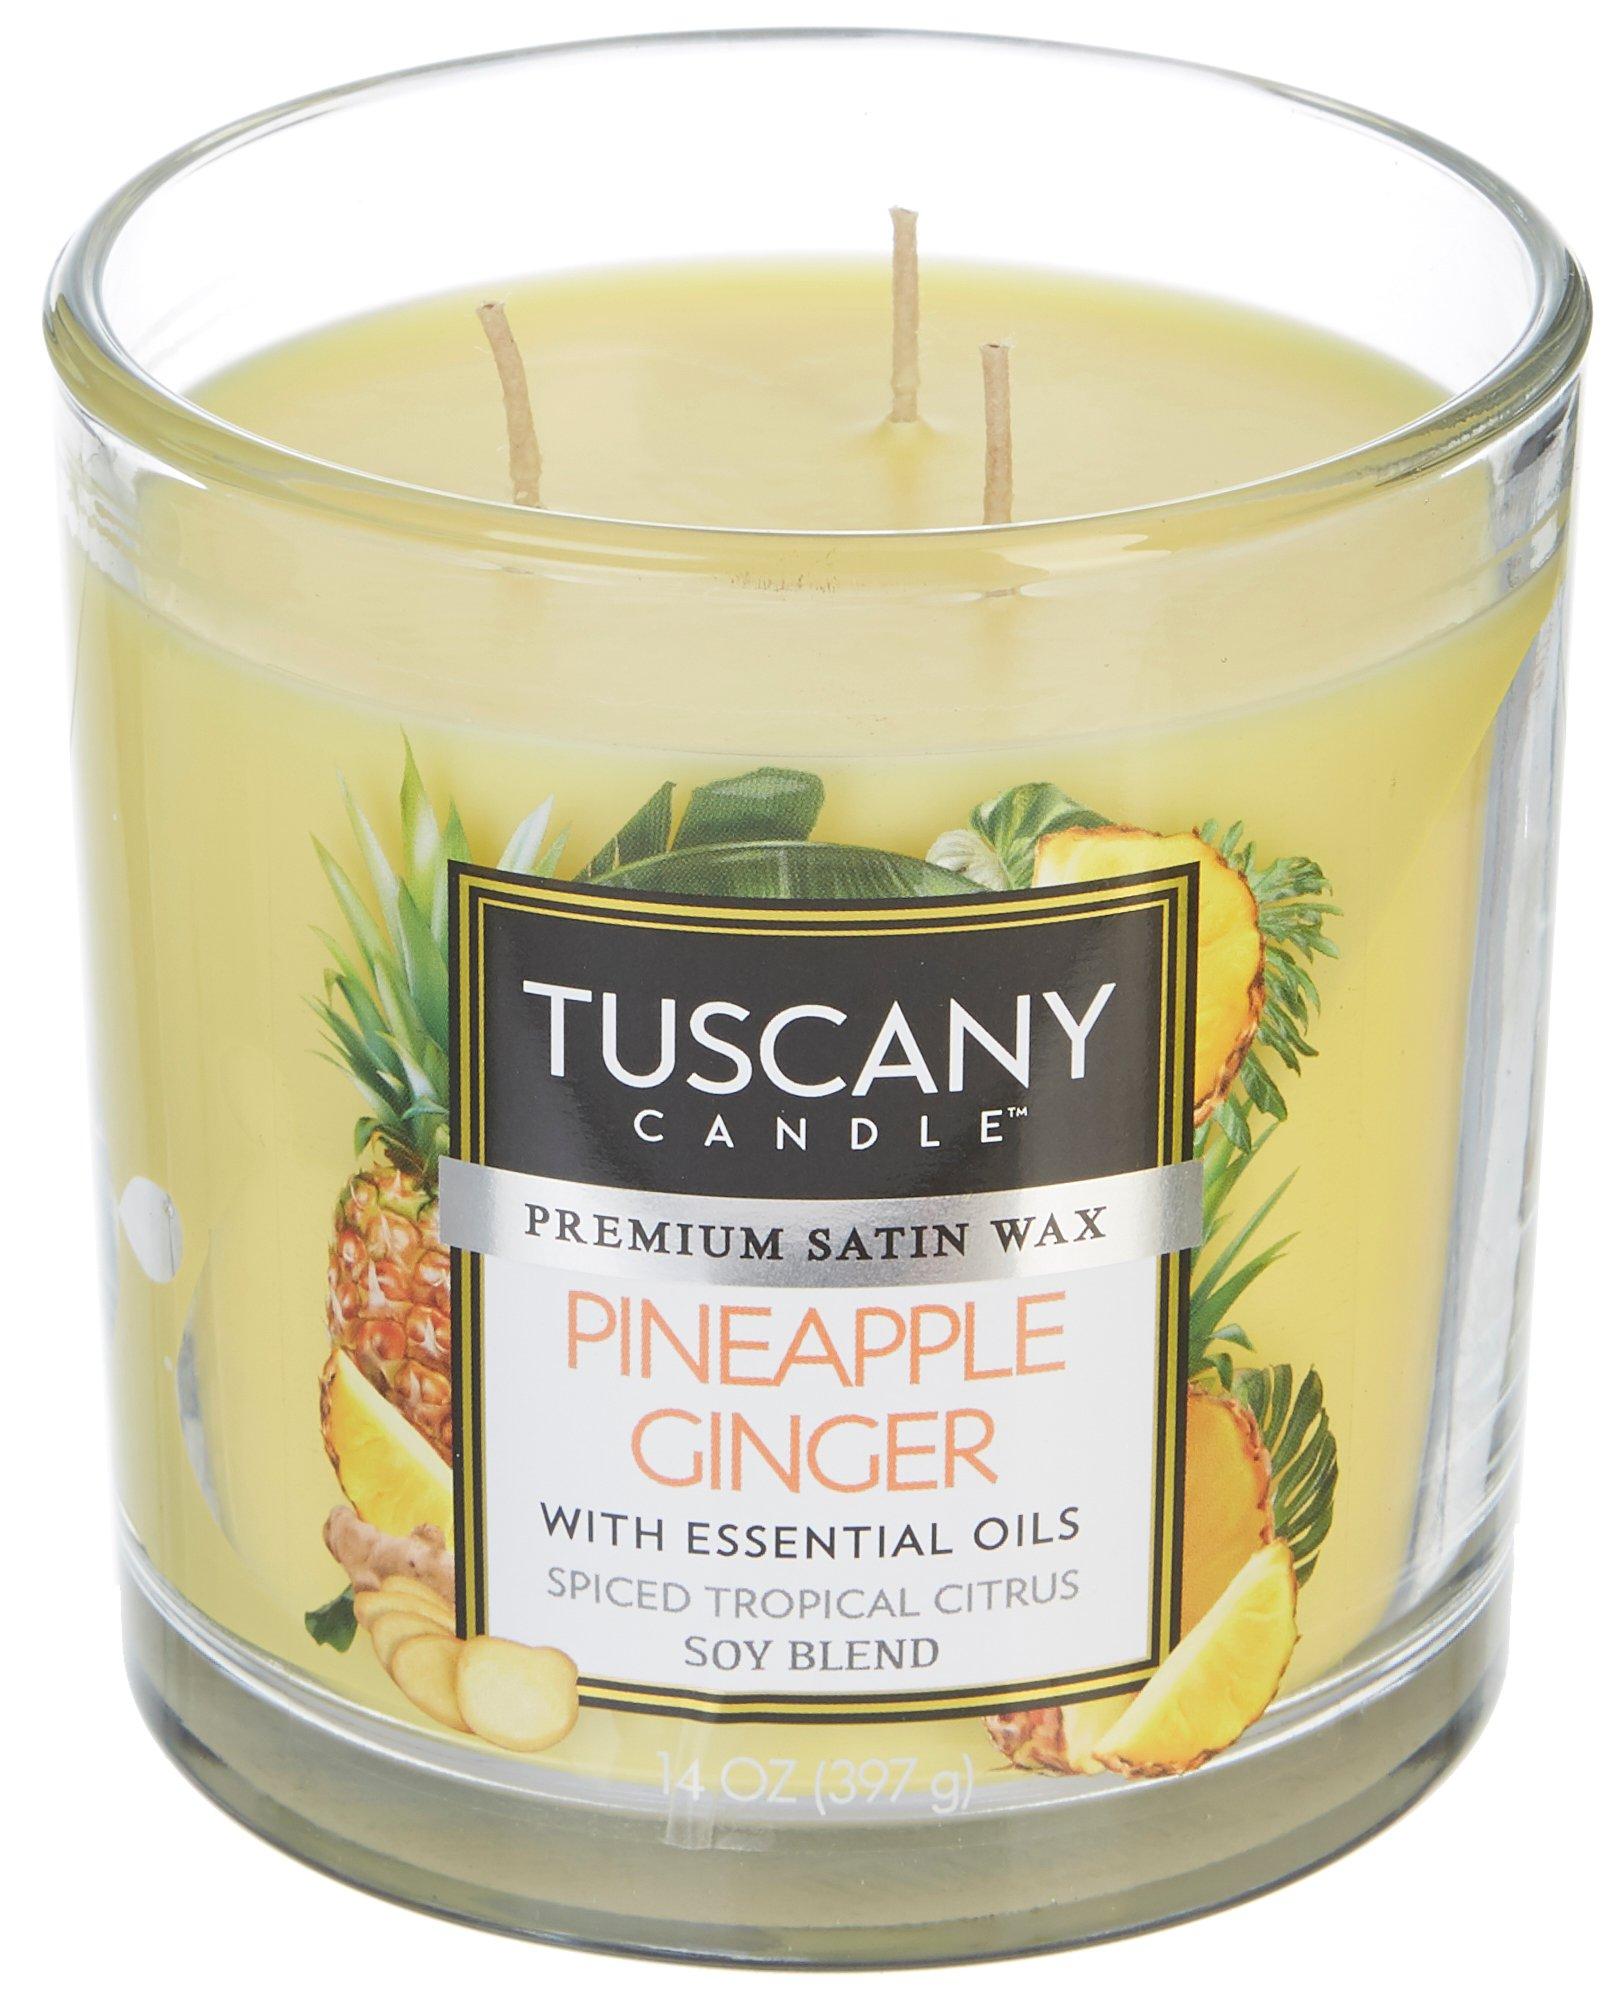 Tuscany Candle Premium Marbled Wax Candle Sea and Sand (18 oz)